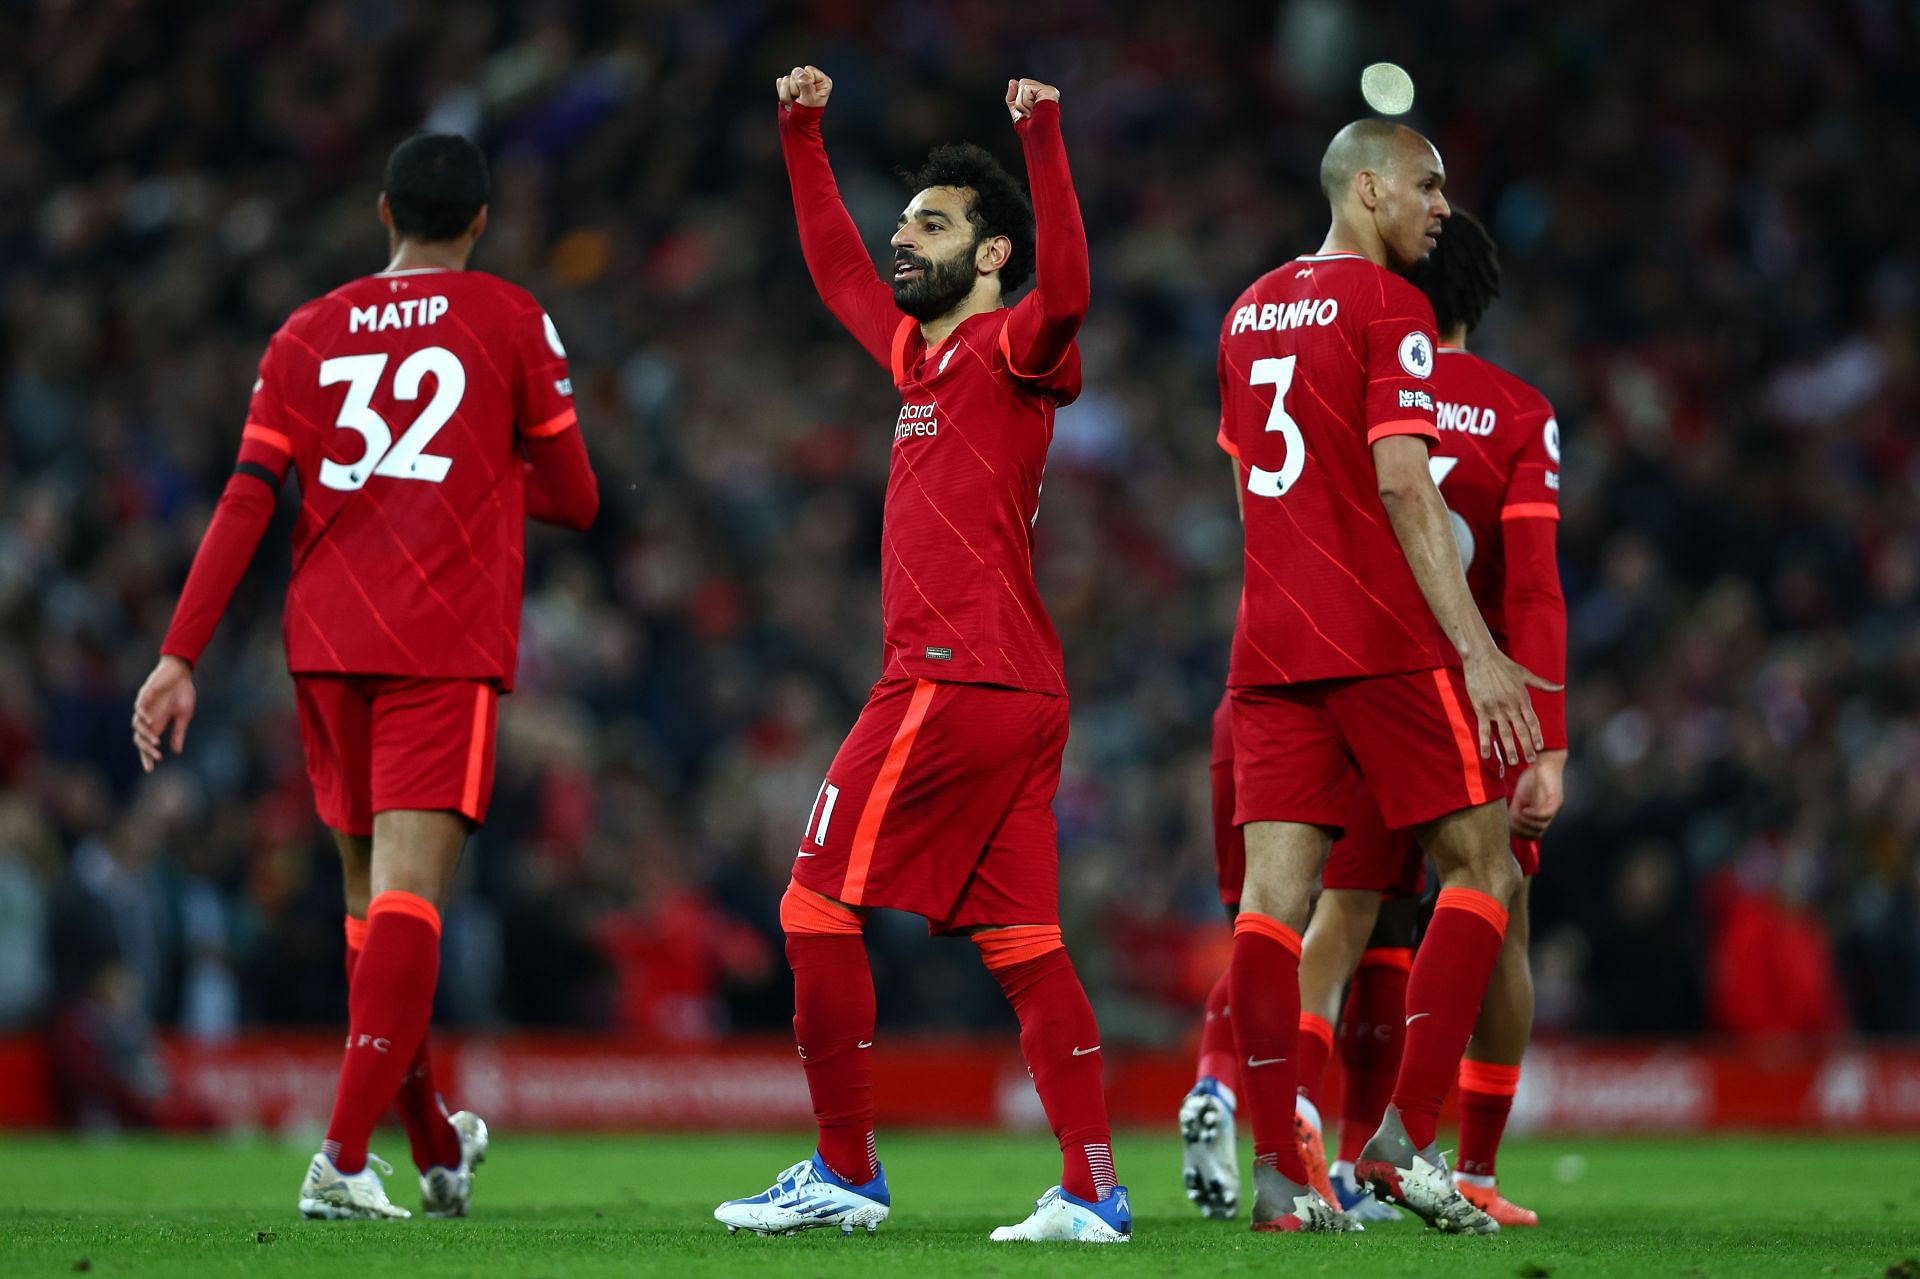 Mohamed Salah (C, #11) and Liverpool were on fire against their bitter rivals